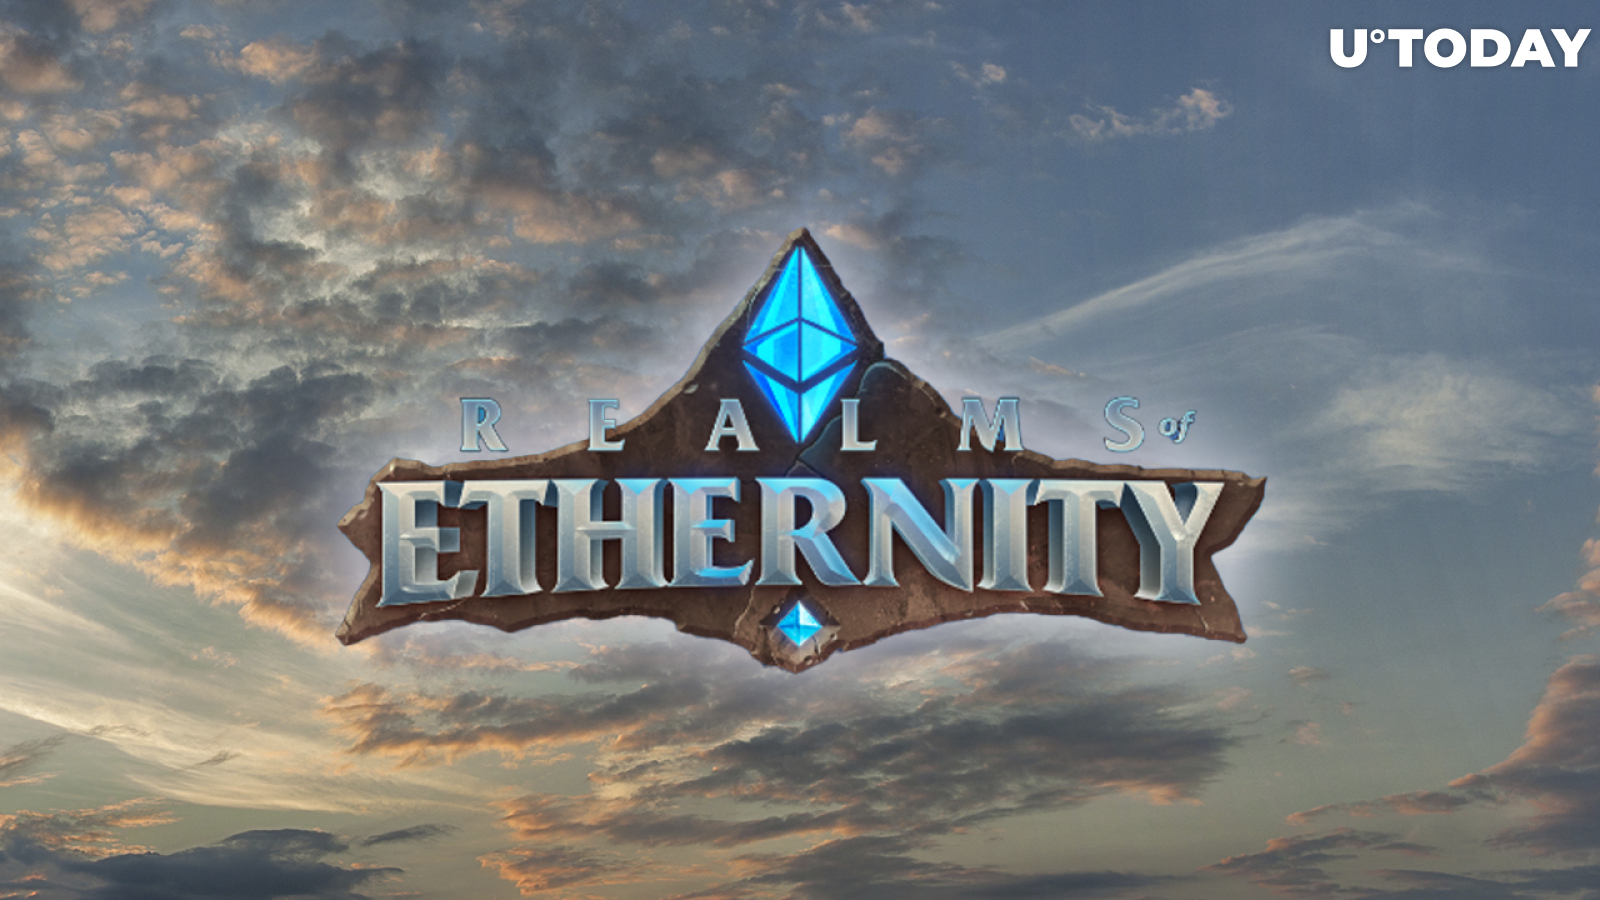 Realms of Ethernity Play-to-Earn MMORPG Explodes onto Polygon: Details